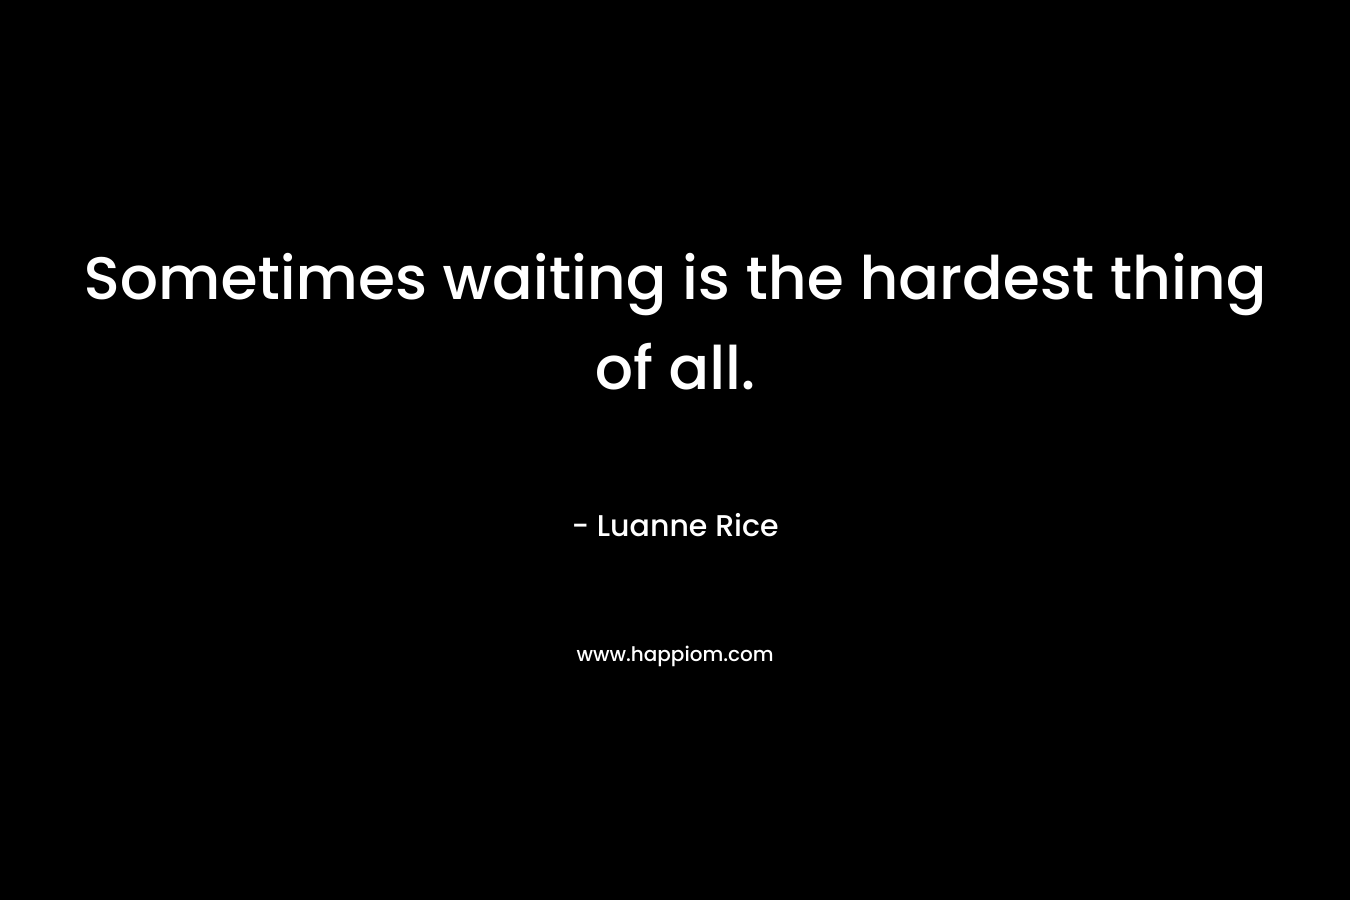 Sometimes waiting is the hardest thing of all. – Luanne Rice